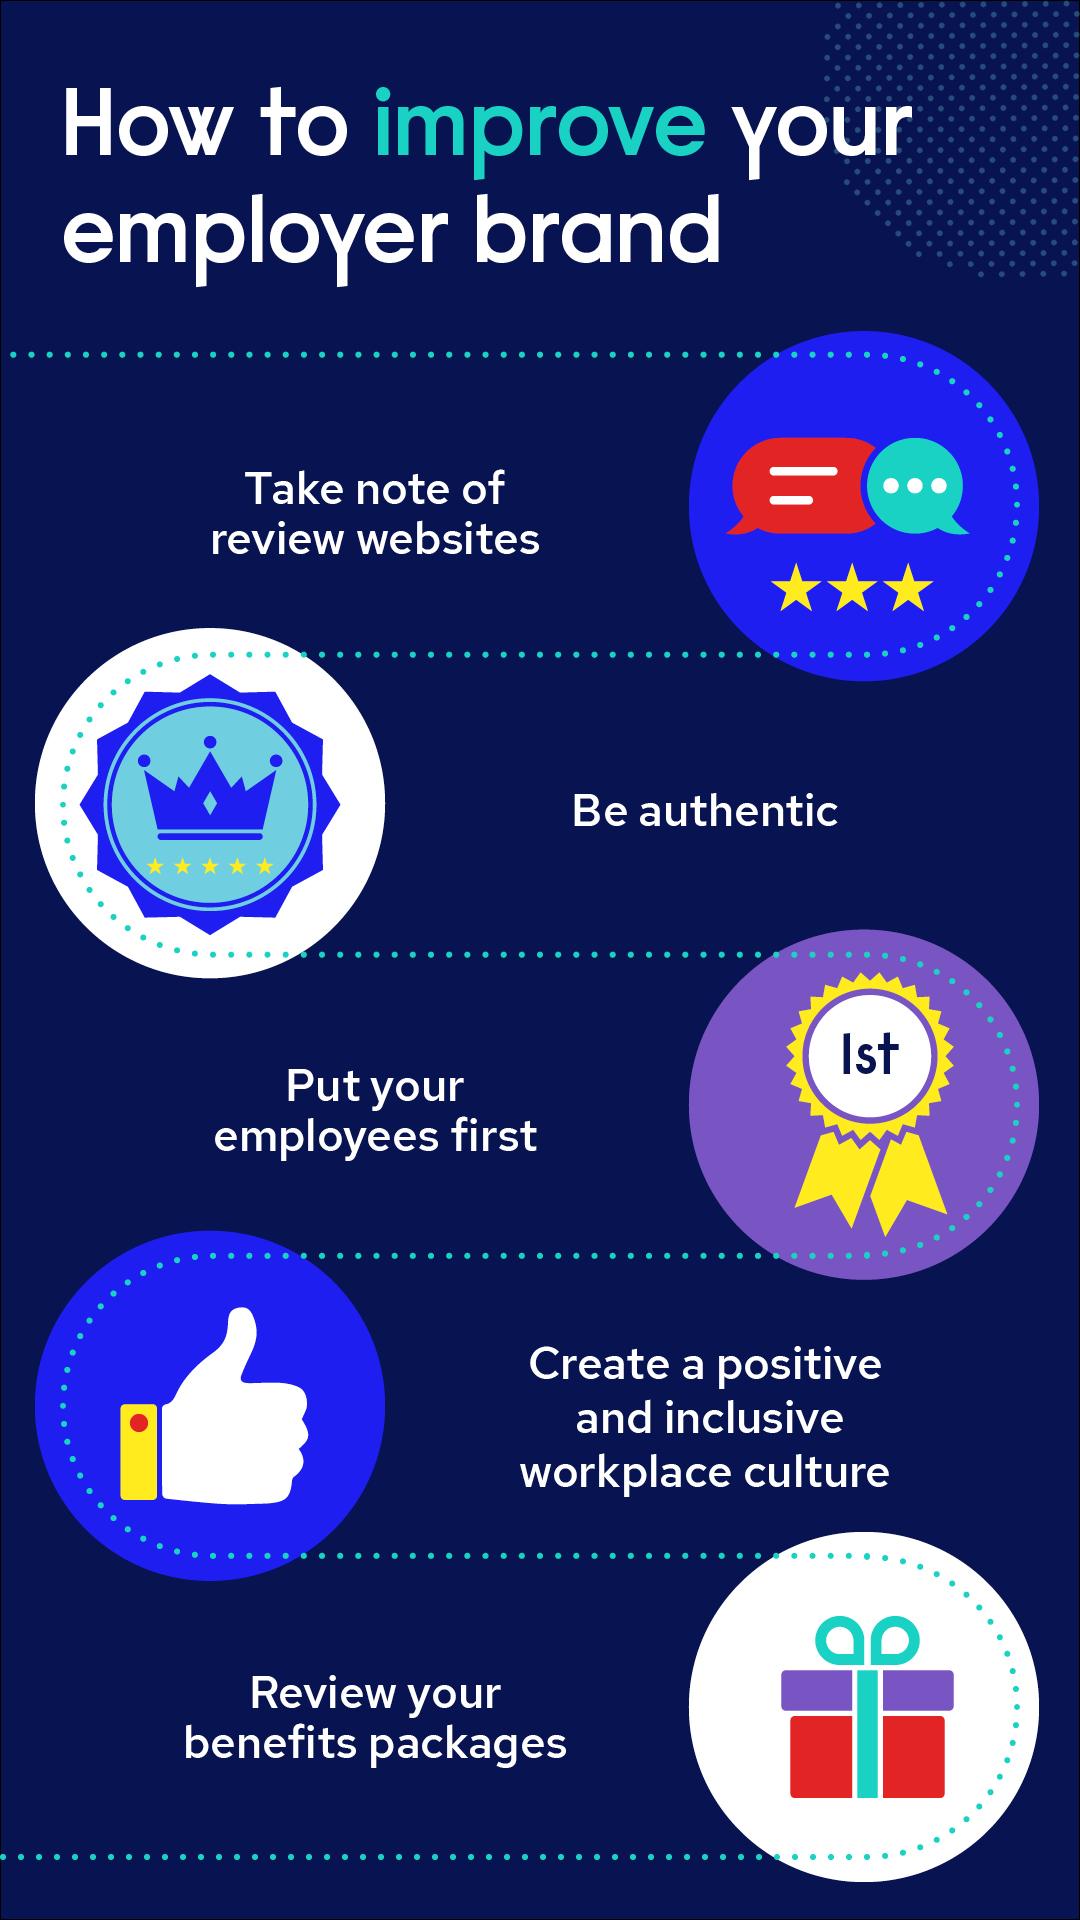 How to improve your employer brand